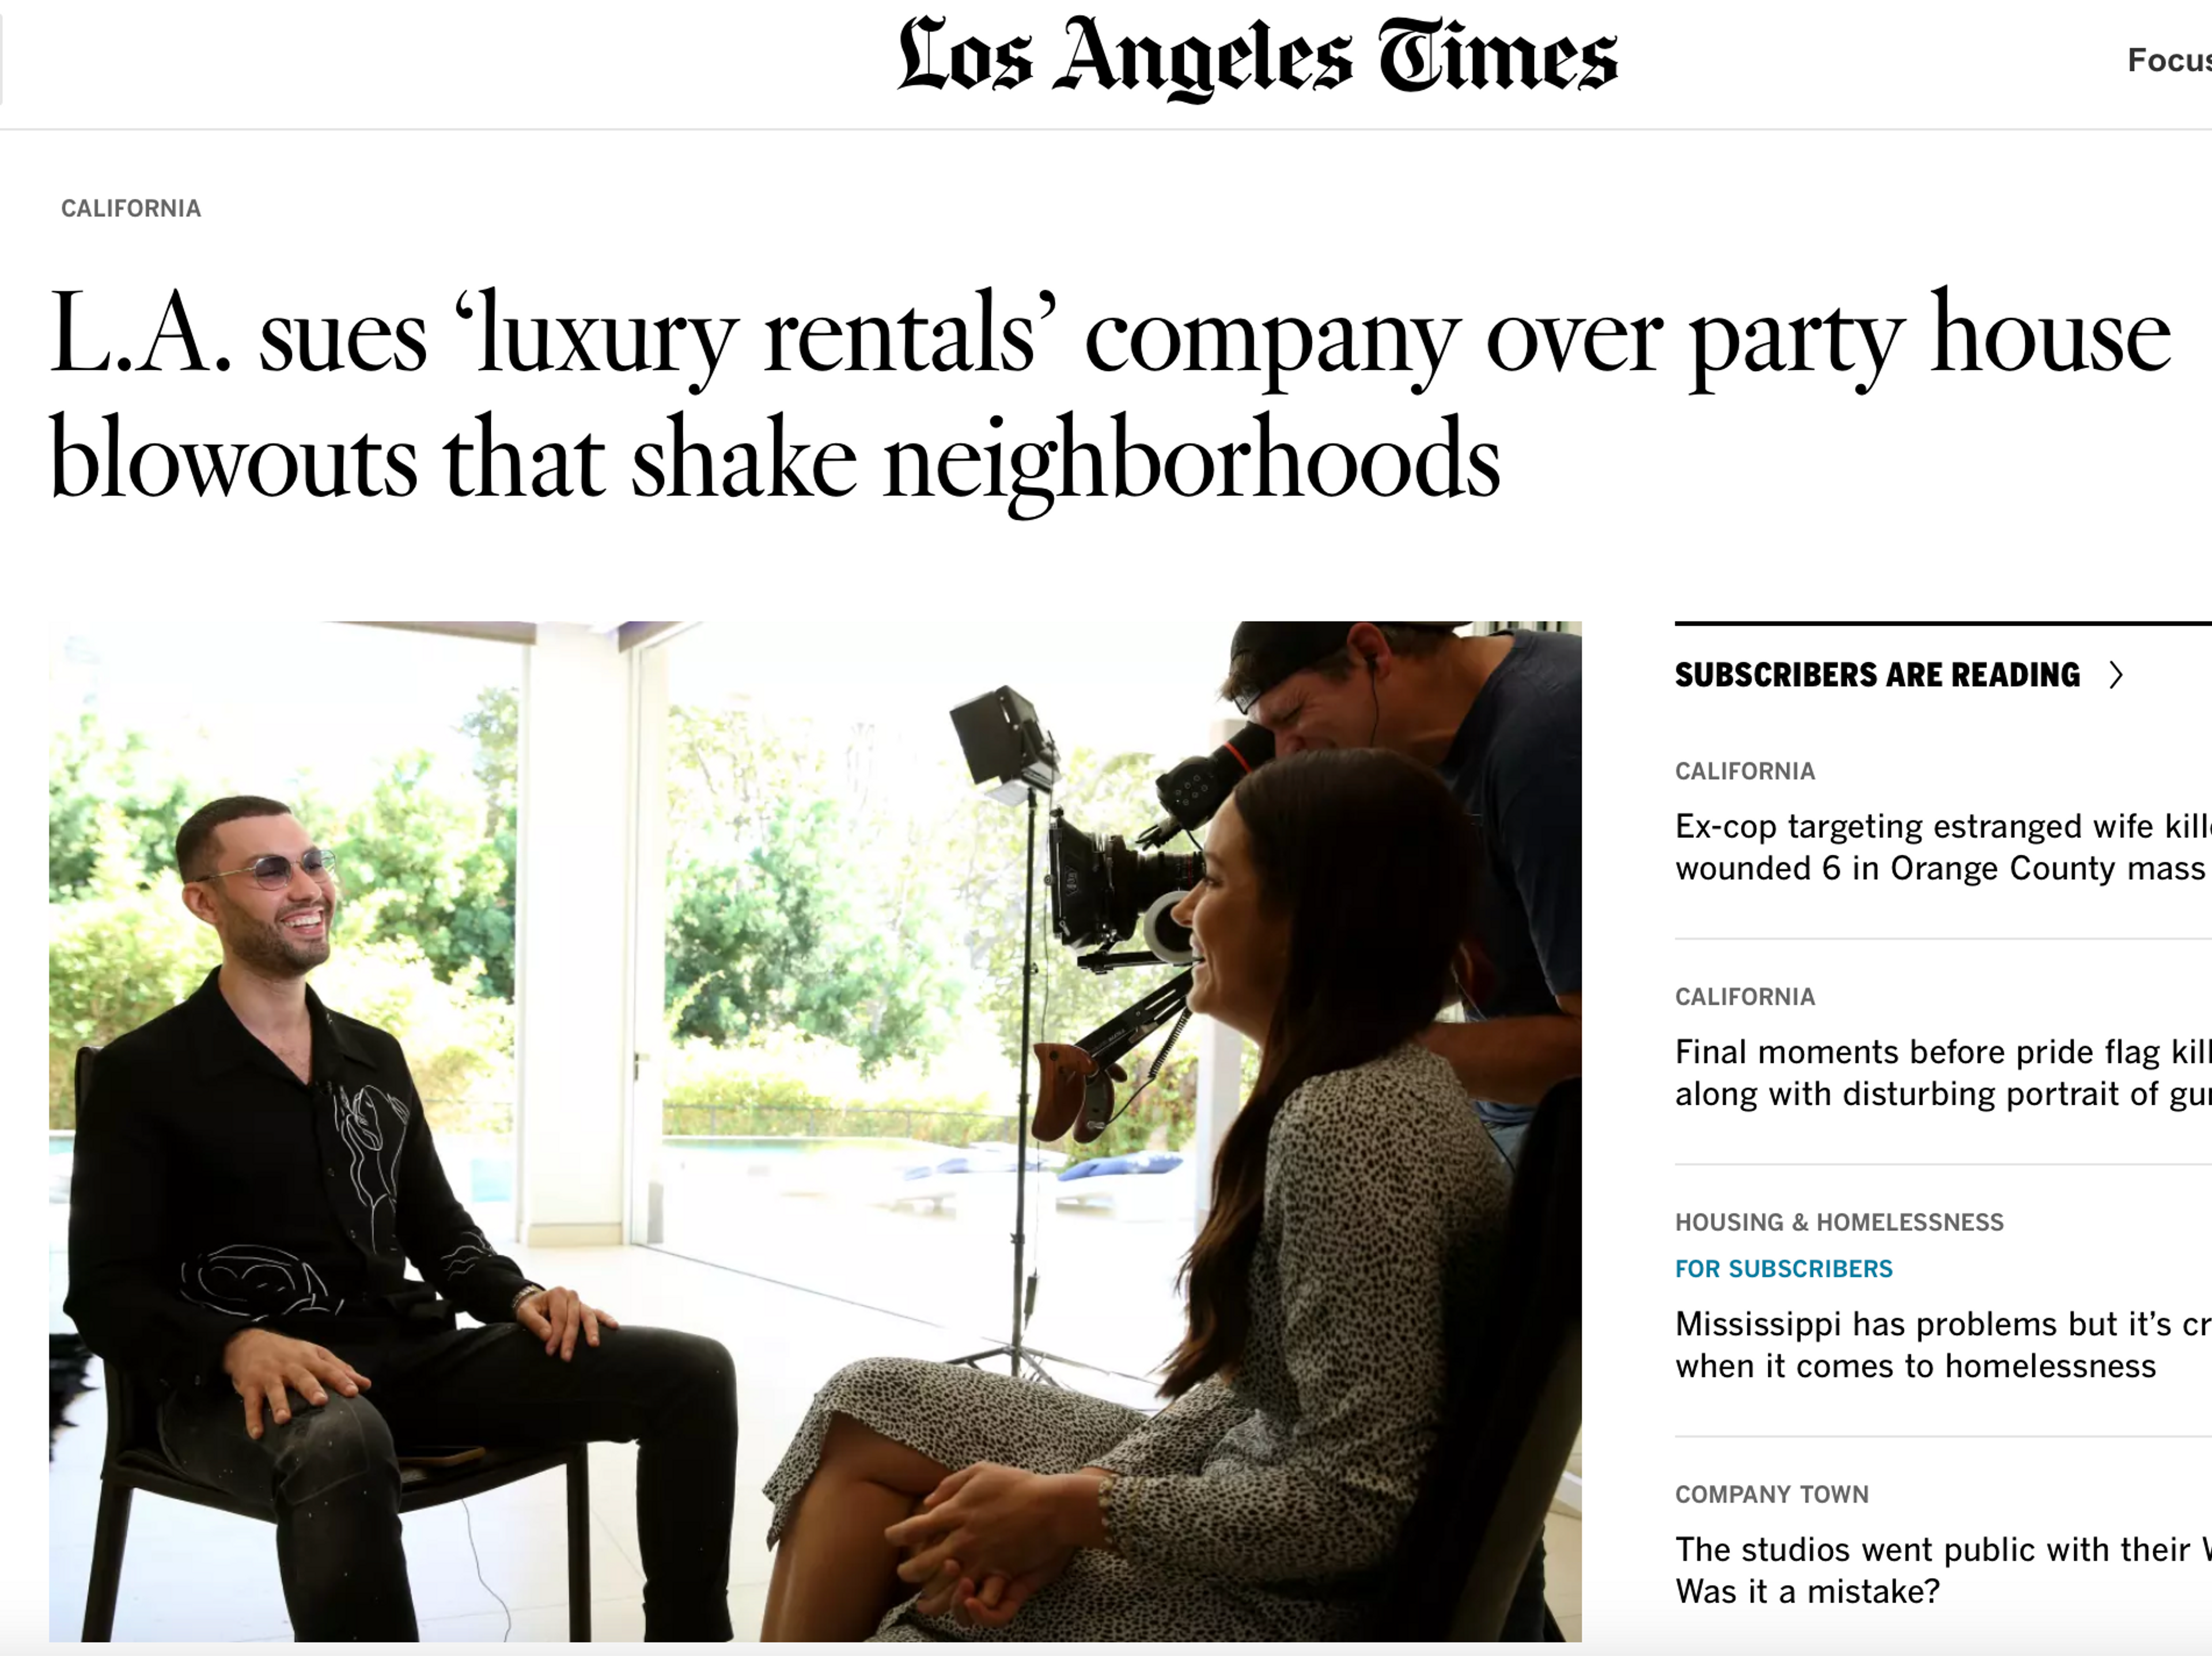 Screenshot of LA Times article on lawsuit over short-term party house rentals